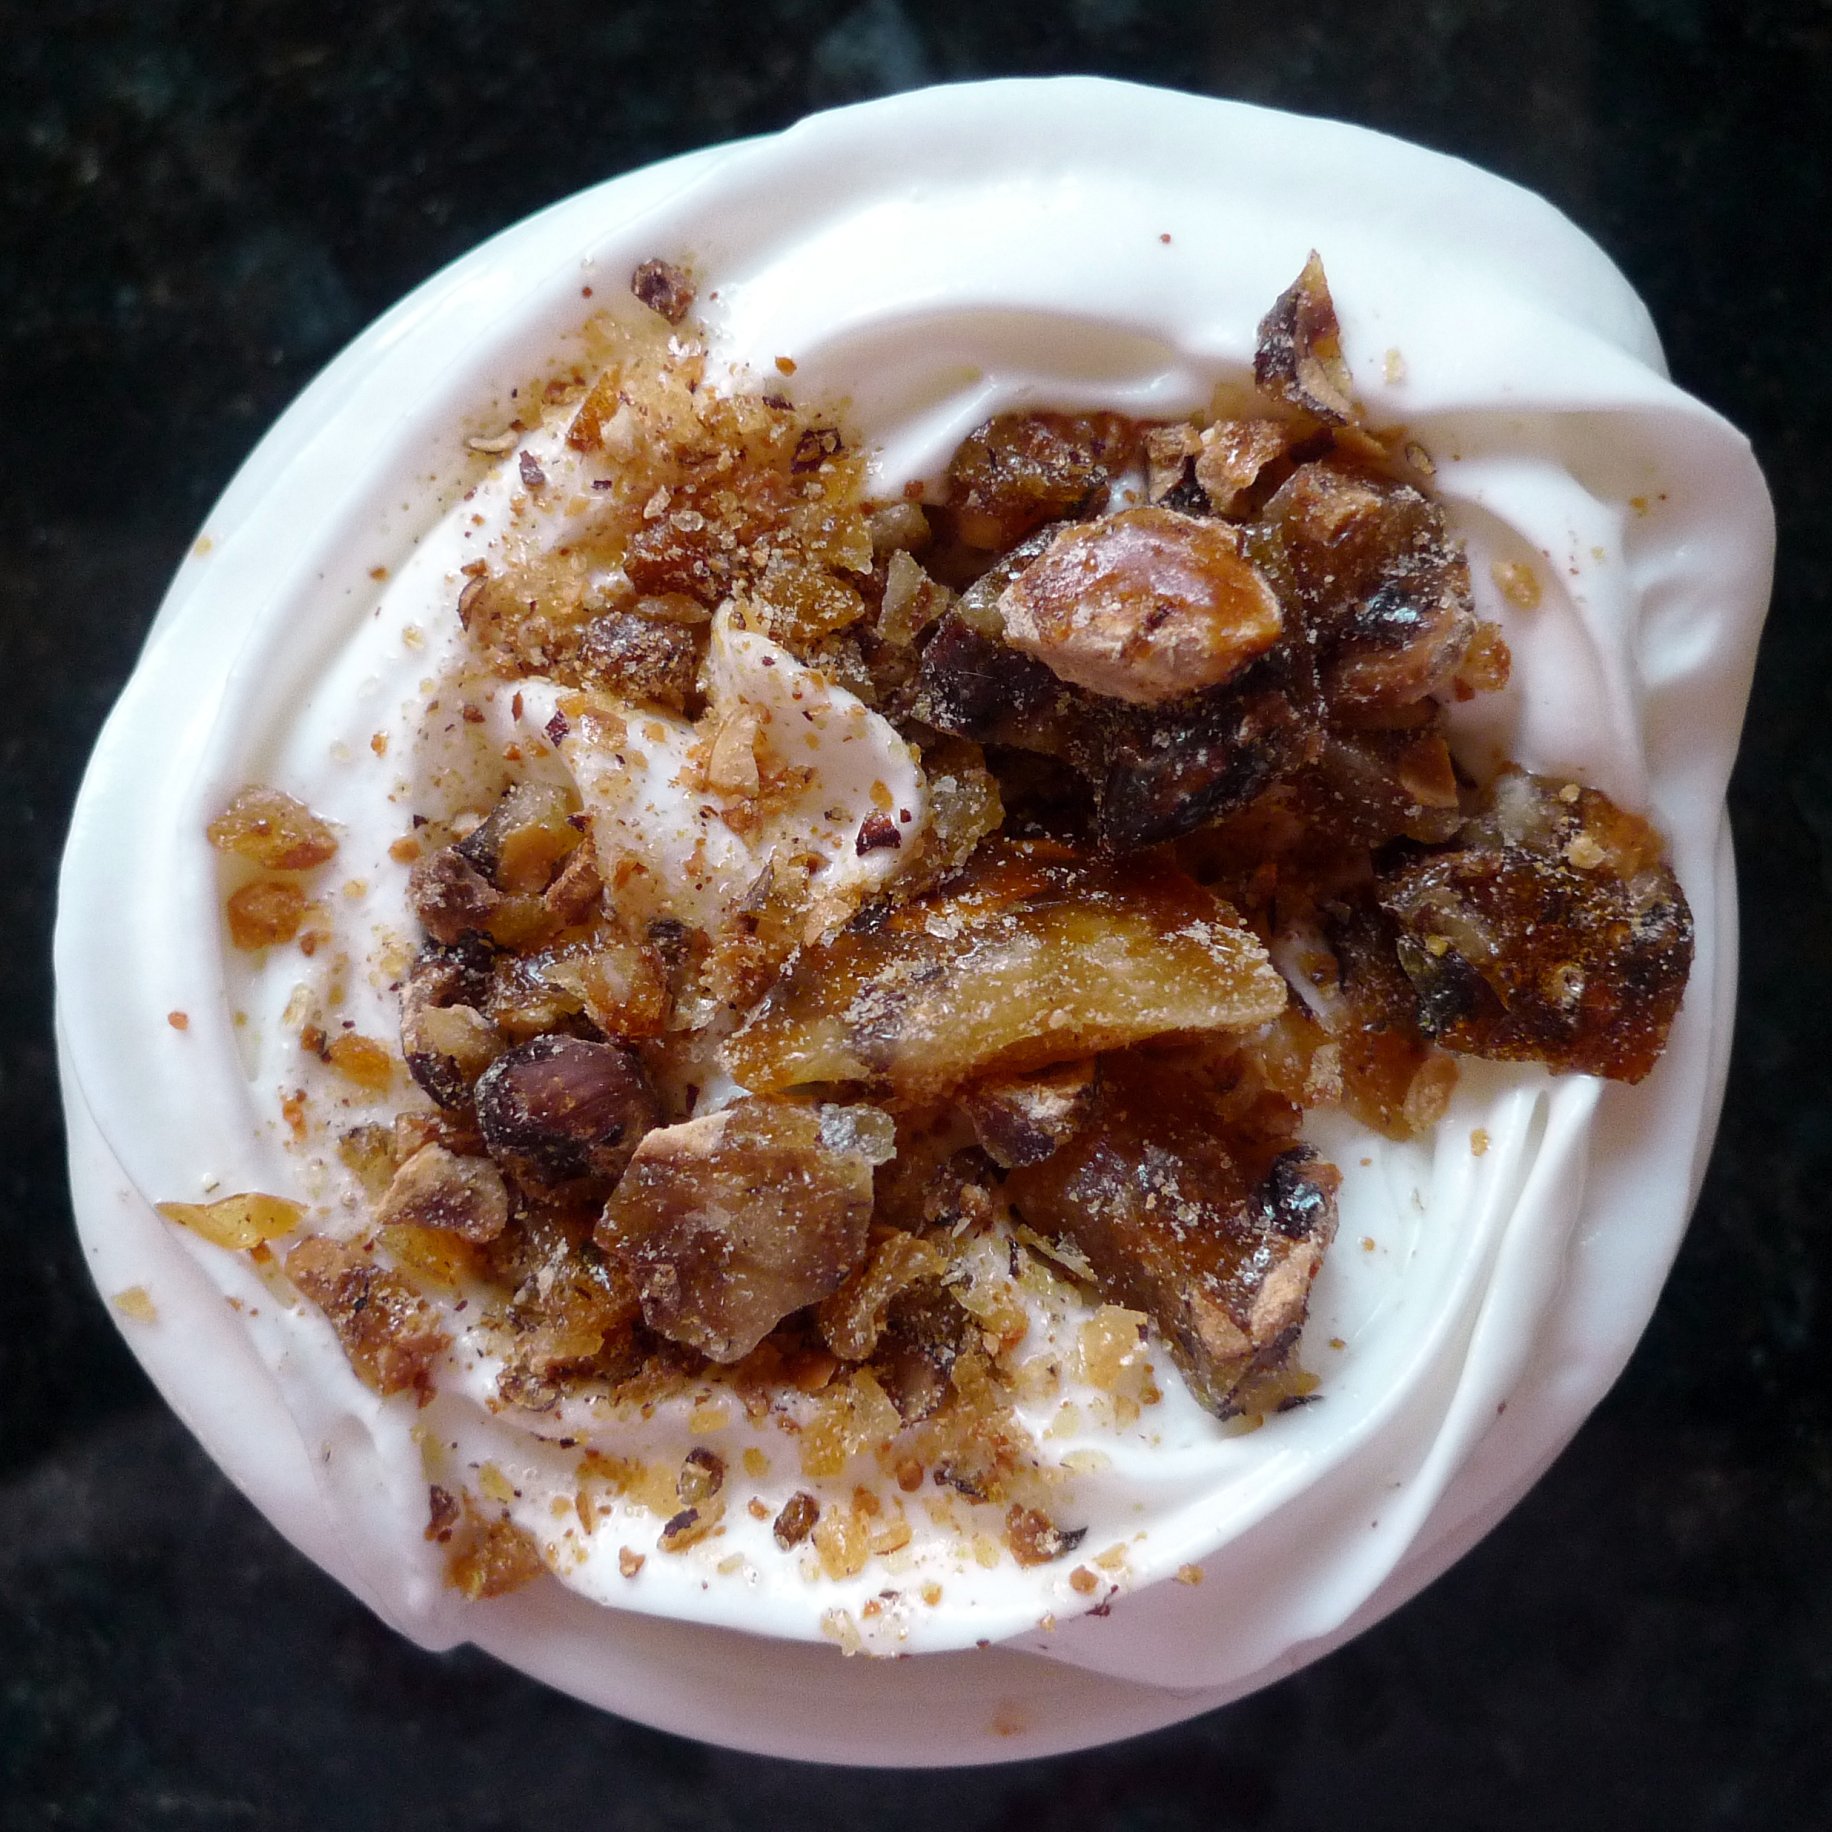 a dessert dish on a white plate that includes nuts and cream